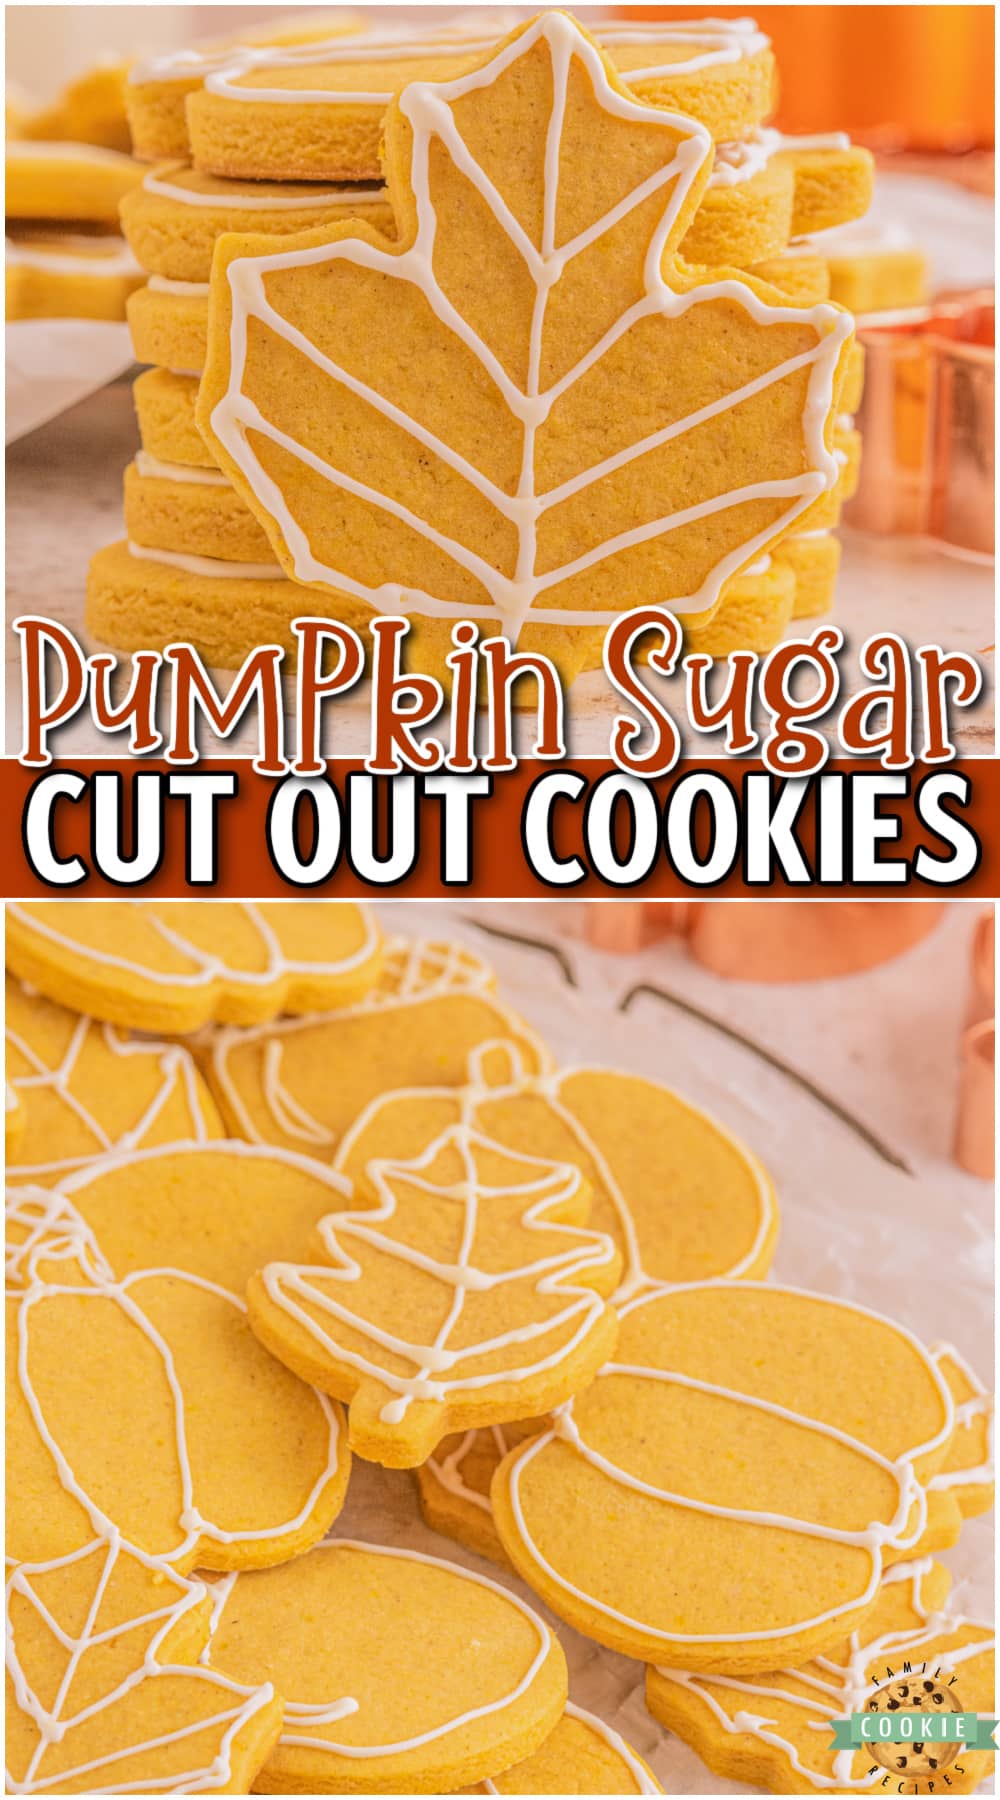 Fall Cut Out Sugar Cookies are soft, flavorful pumpkin cookies cut into delightful Autumn shapes! Perfect pumpkin spice flavor in these buttery sugar cookies.